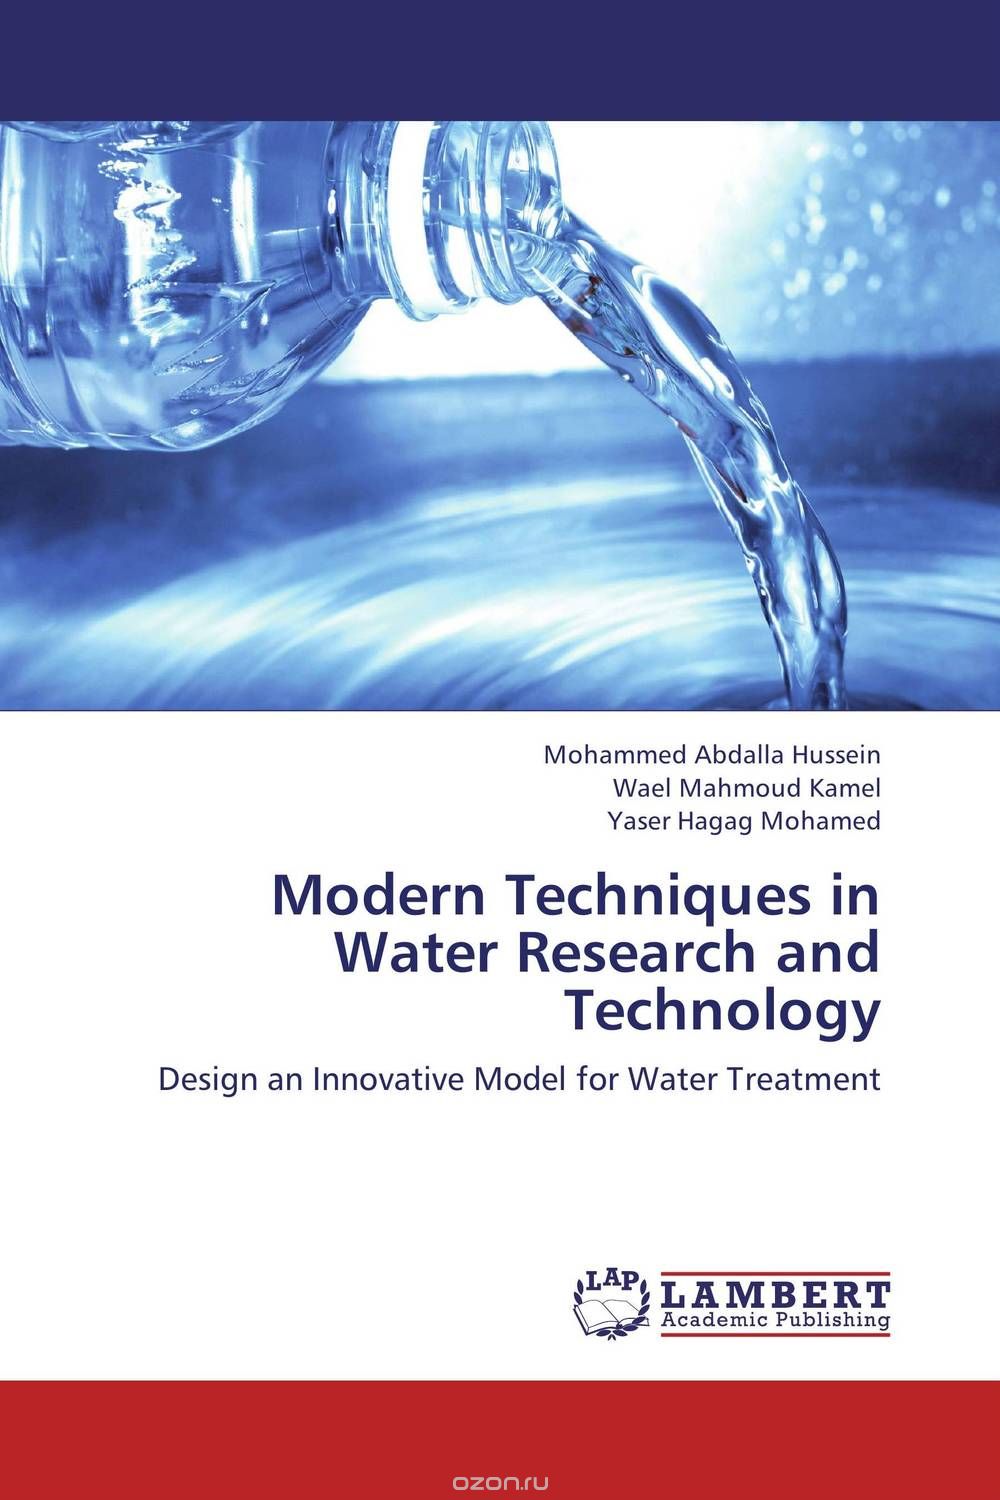 Modern Techniques in Water Research and Technology